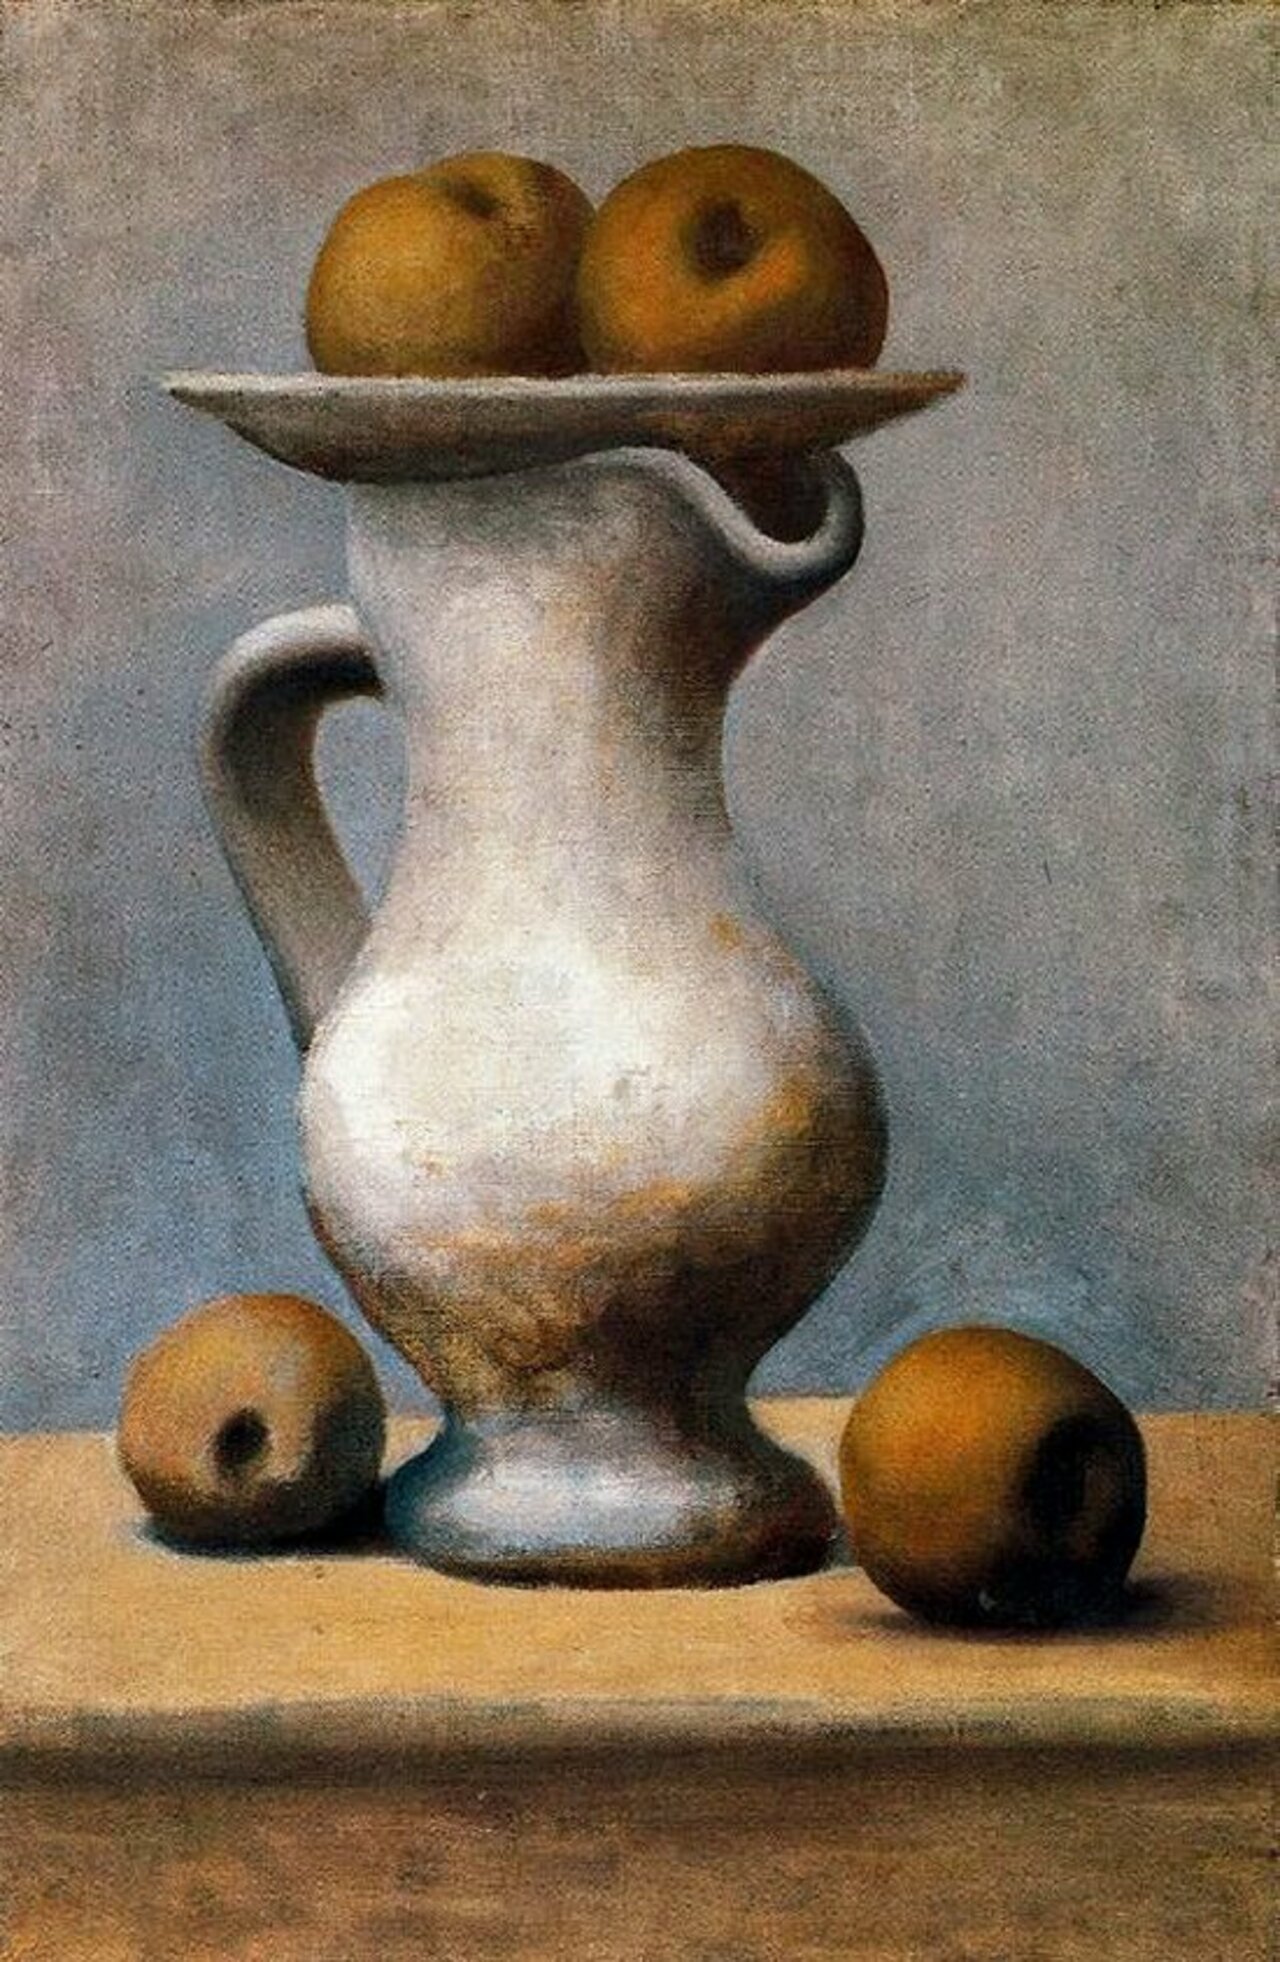 Still Life with Pitcher and Apples, 1919 by Pablo #Picasso http://mf.tt/i7CAC @googleexpertuk #art https://t.co/7CN8XHLha6